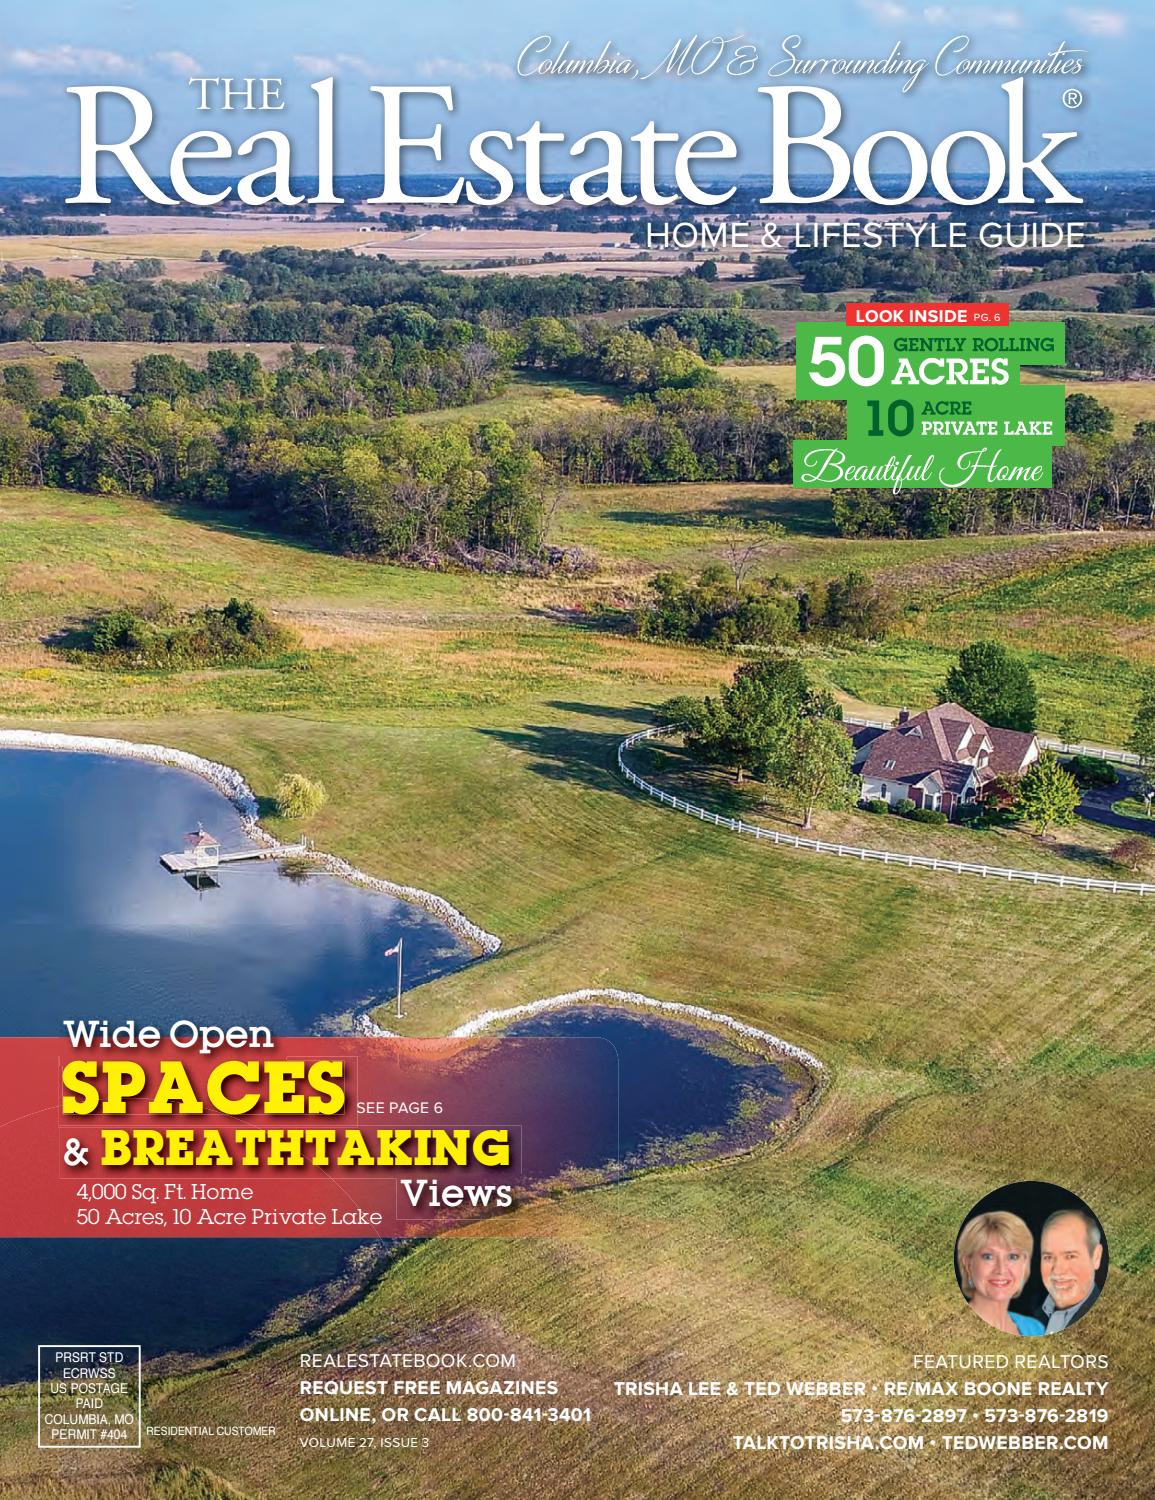 Fireplace Leaking Water Luxury Columbia the Real Estate Book Volume 27 issue 3 by